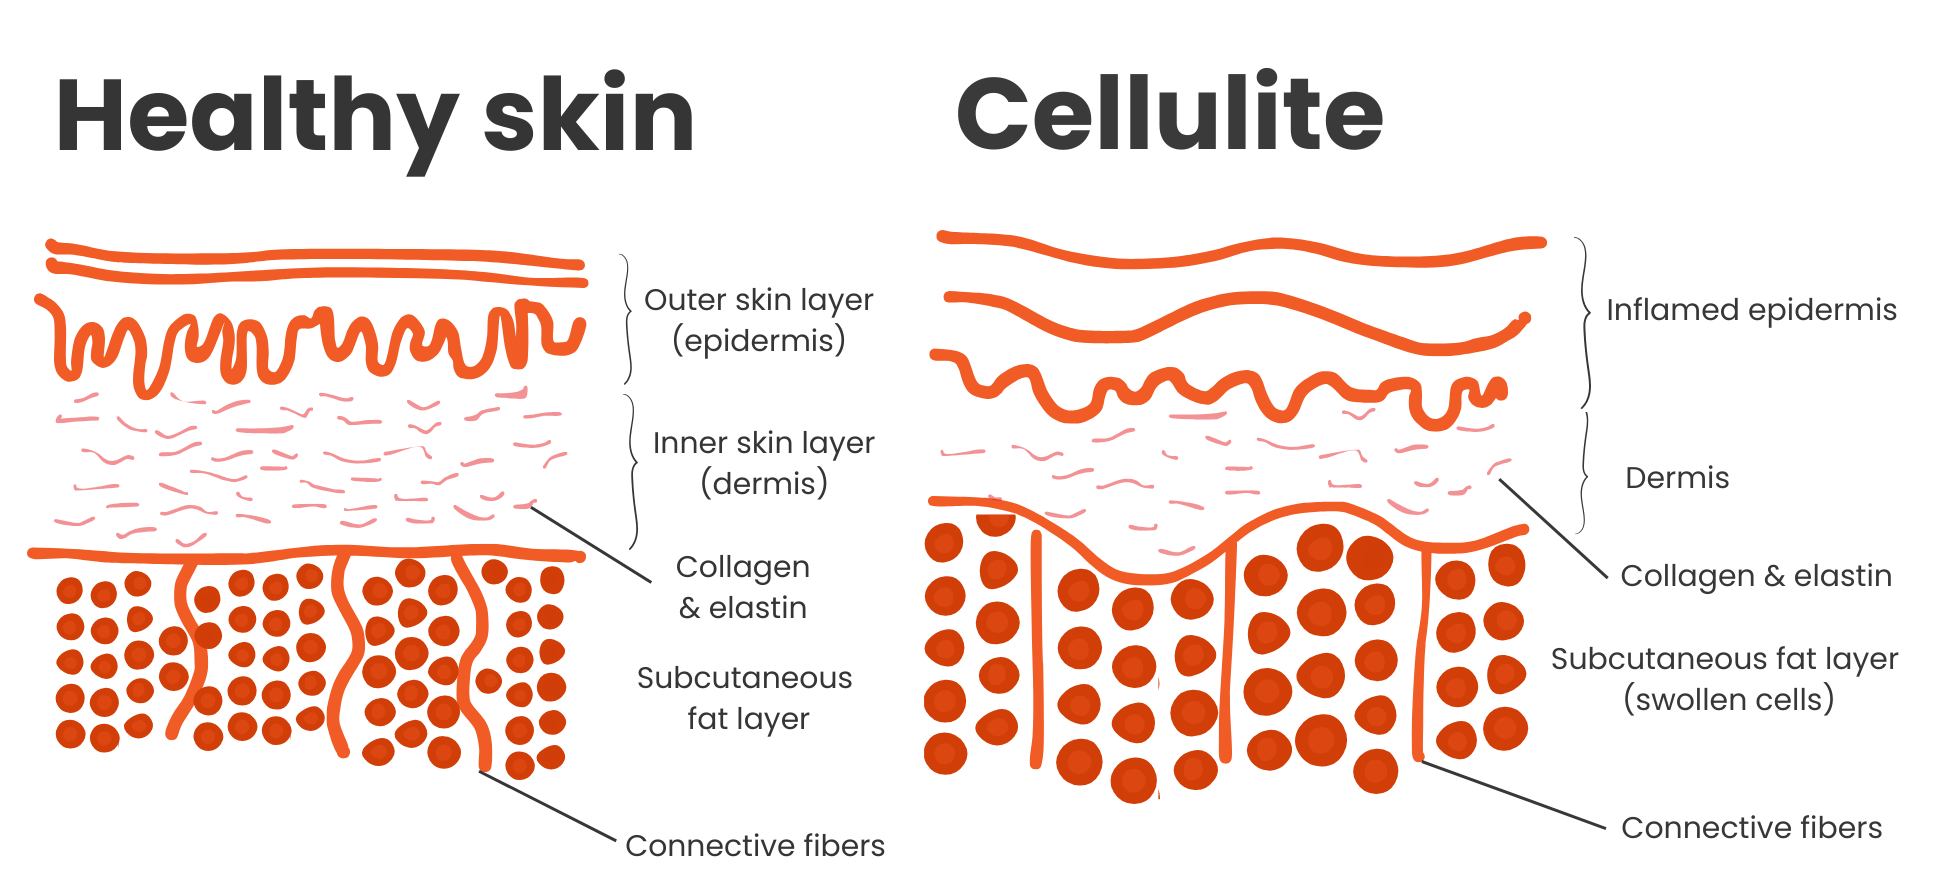 How cellulite forms versus how normal skin looks. Difference in collagen and elastin fibers, subcutaneous fat